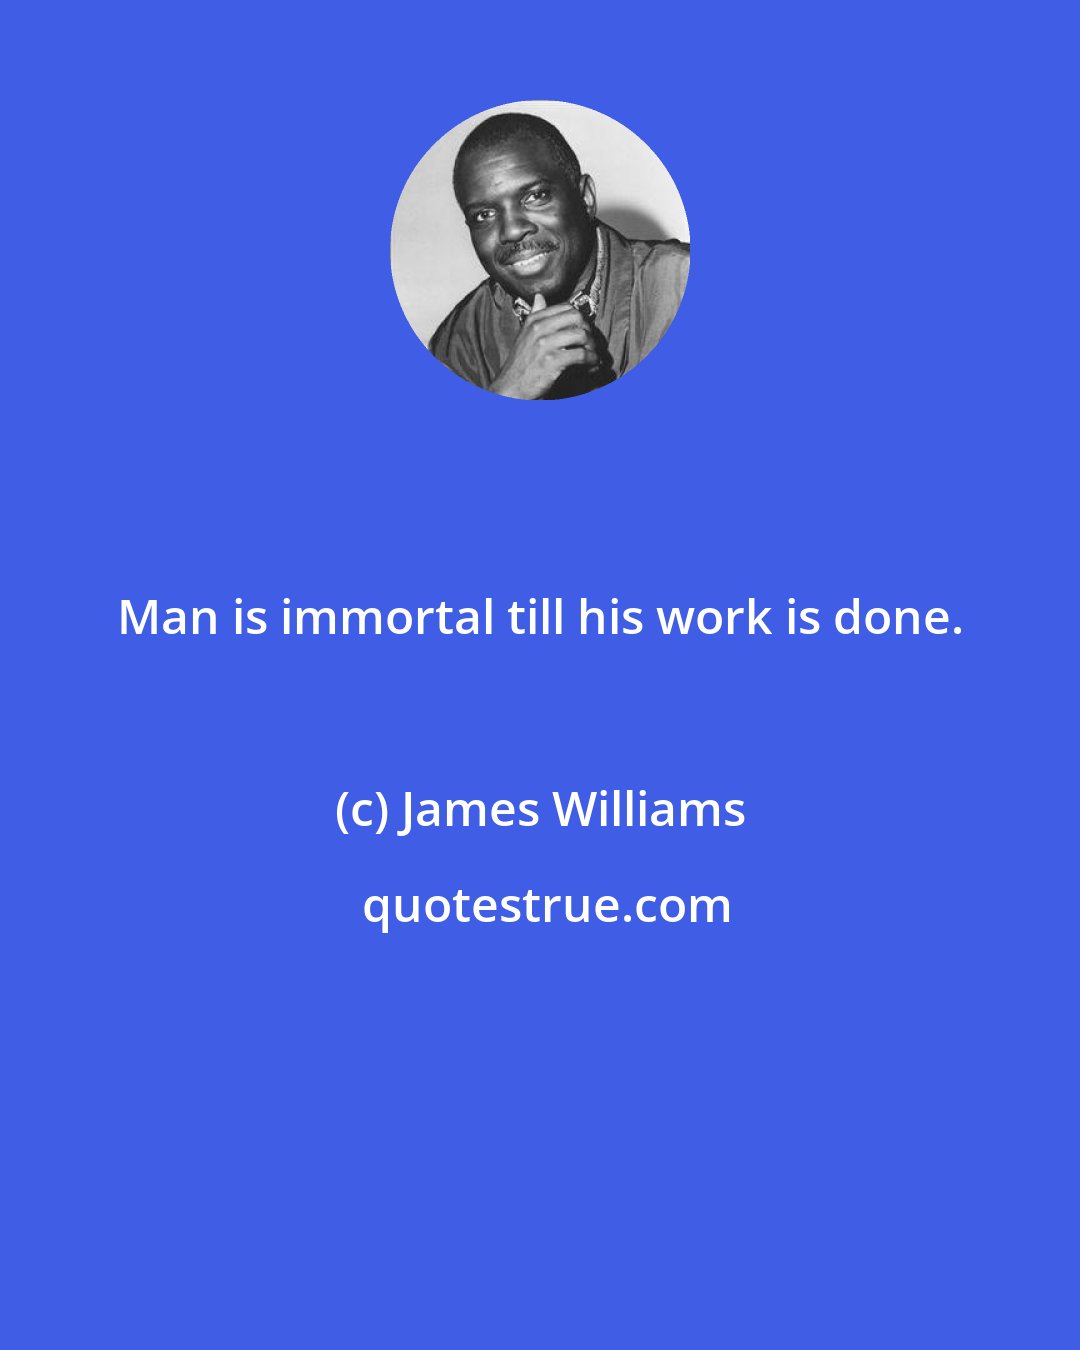 James Williams: Man is immortal till his work is done.